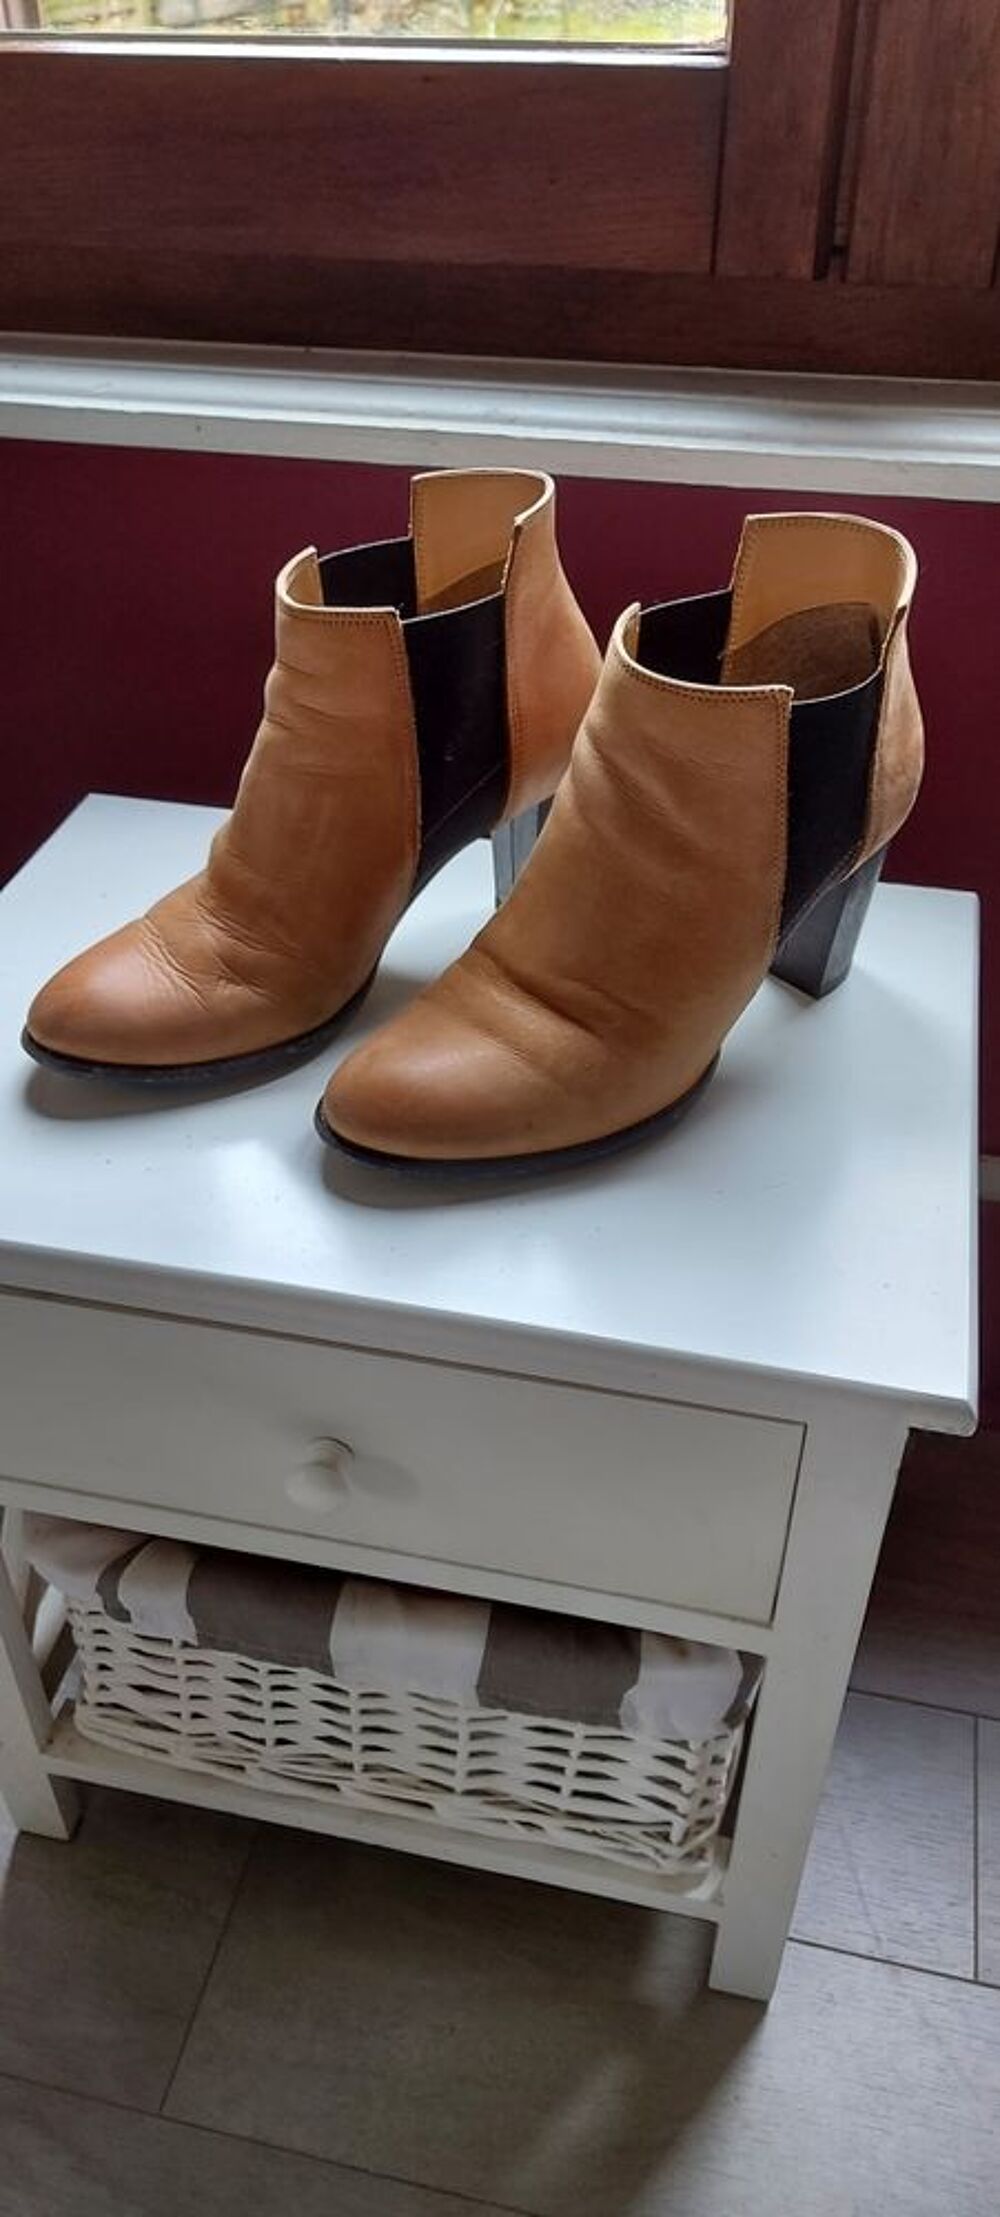 Bottines cuir Andr&eacute; camel T38 Chaussures